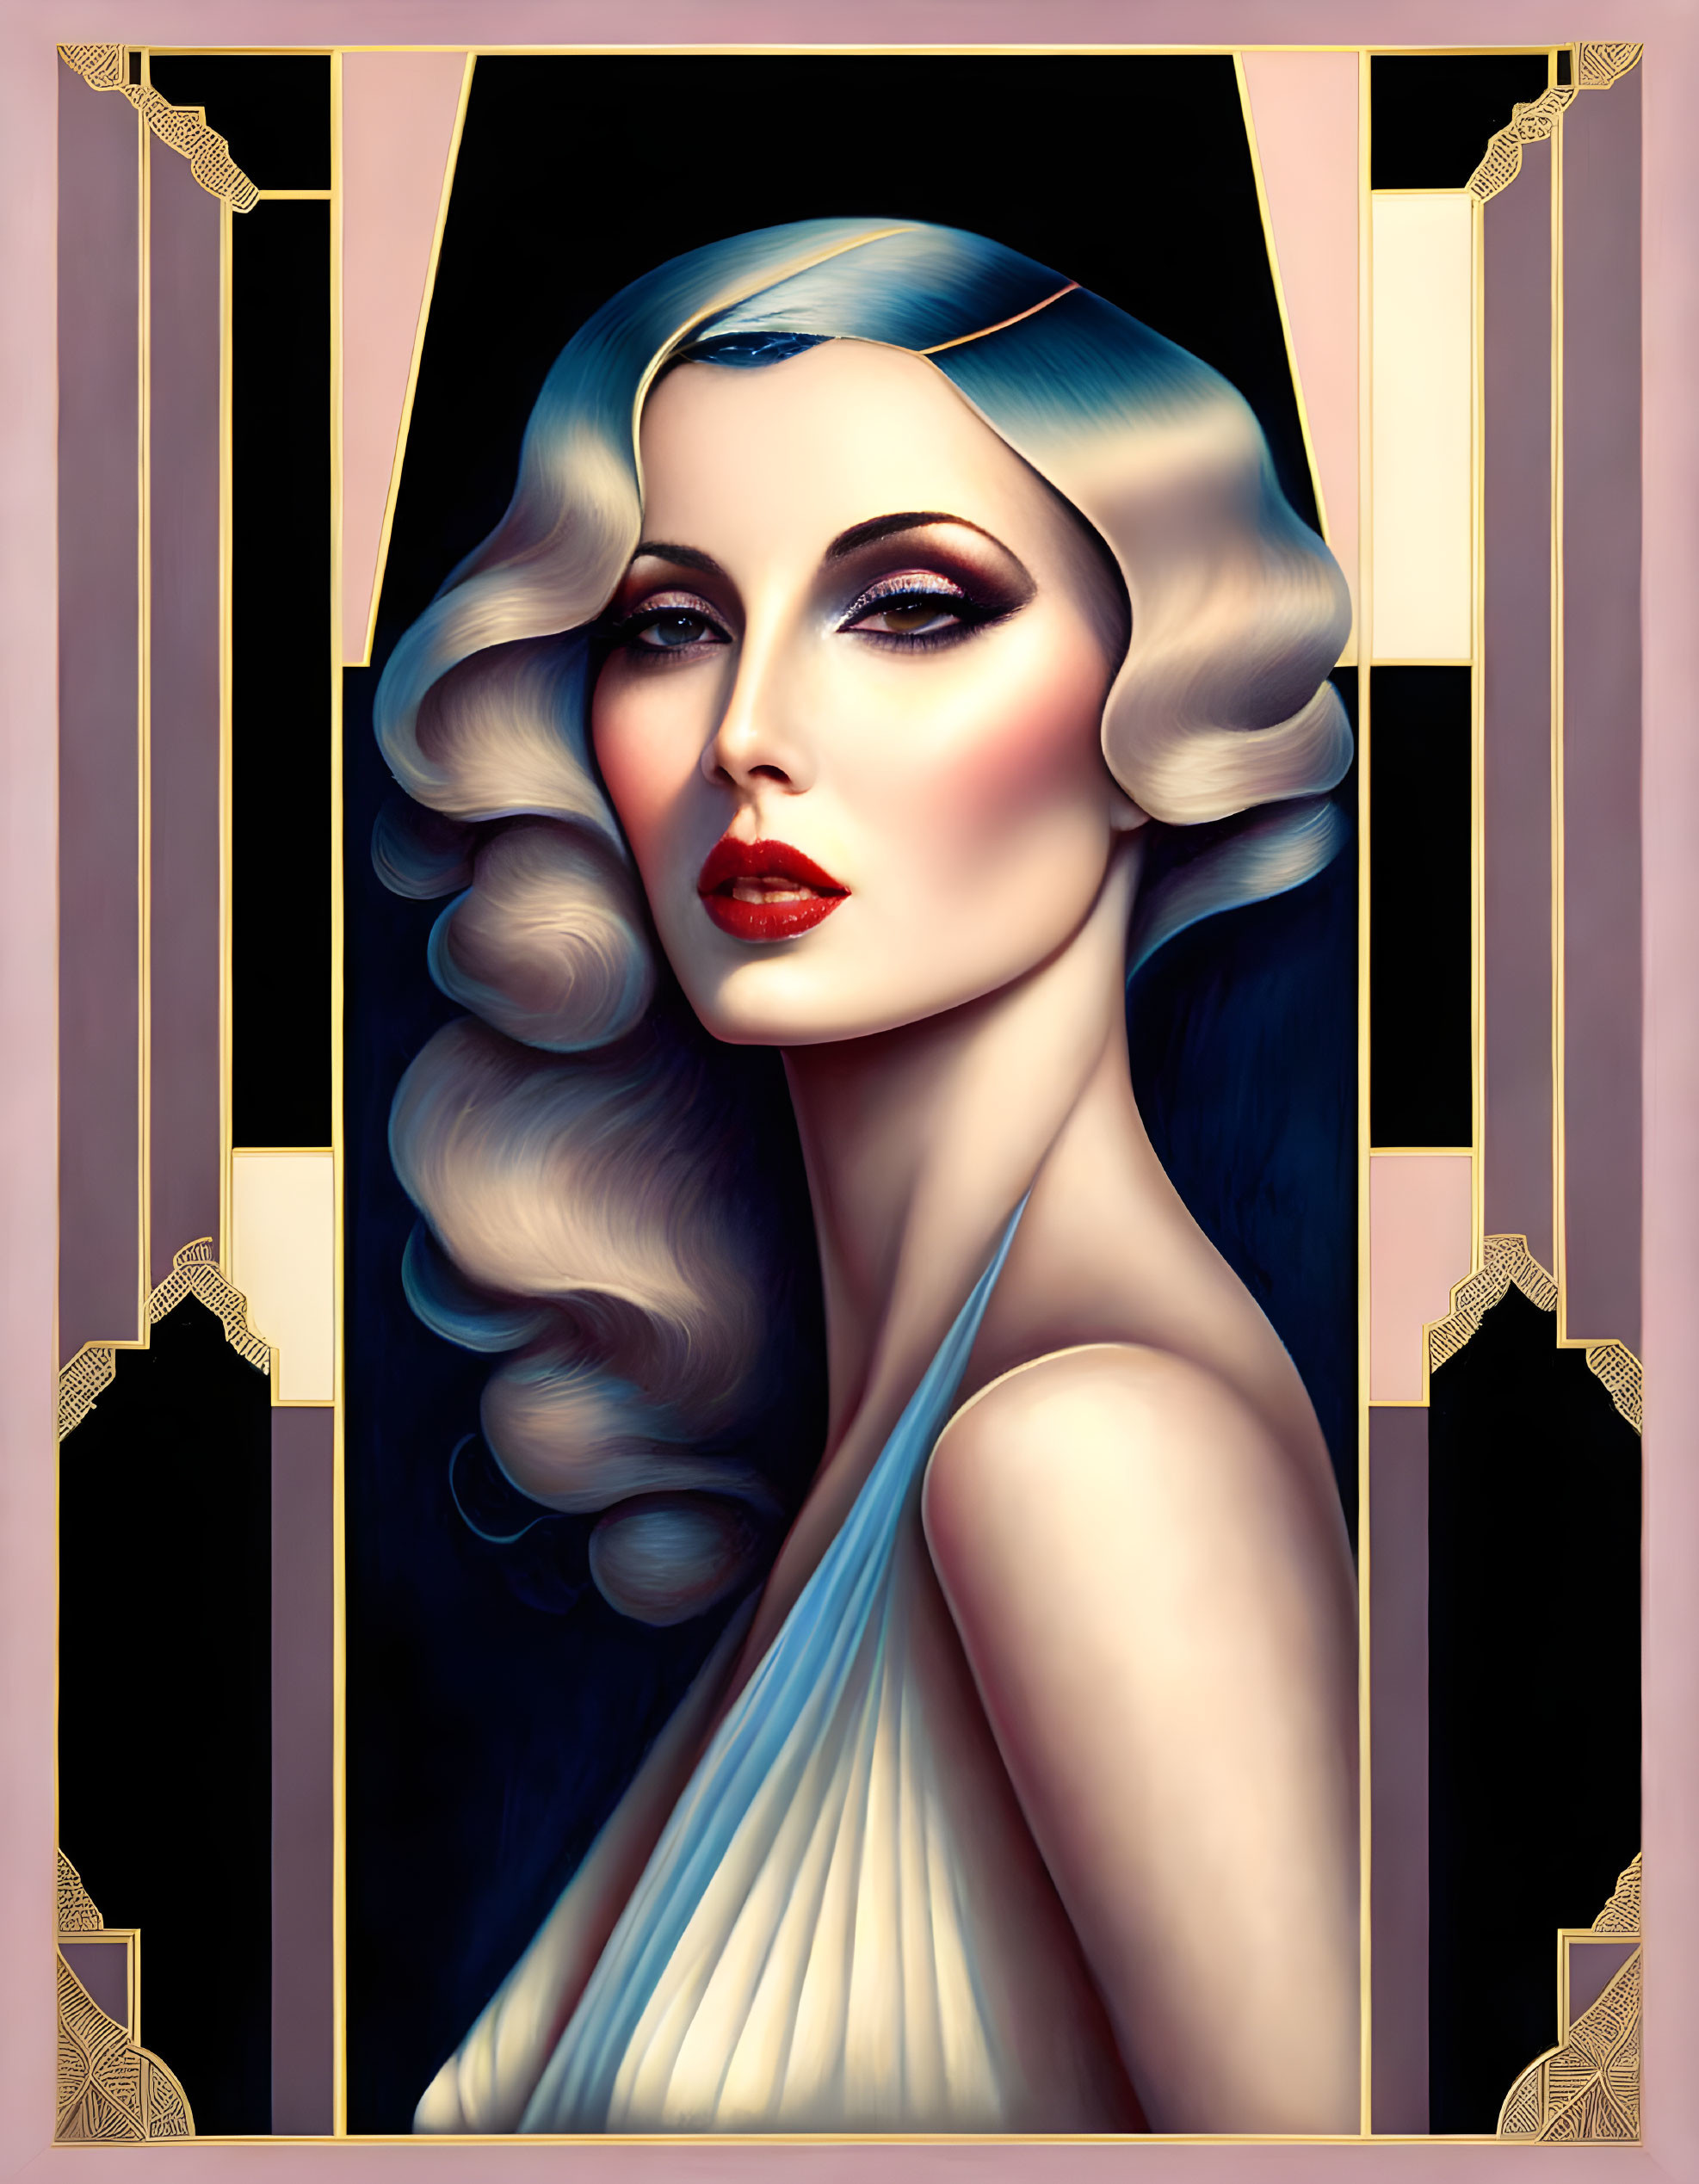 Art Deco Style Illustration of Woman with Blonde Hair and Red Lipstick